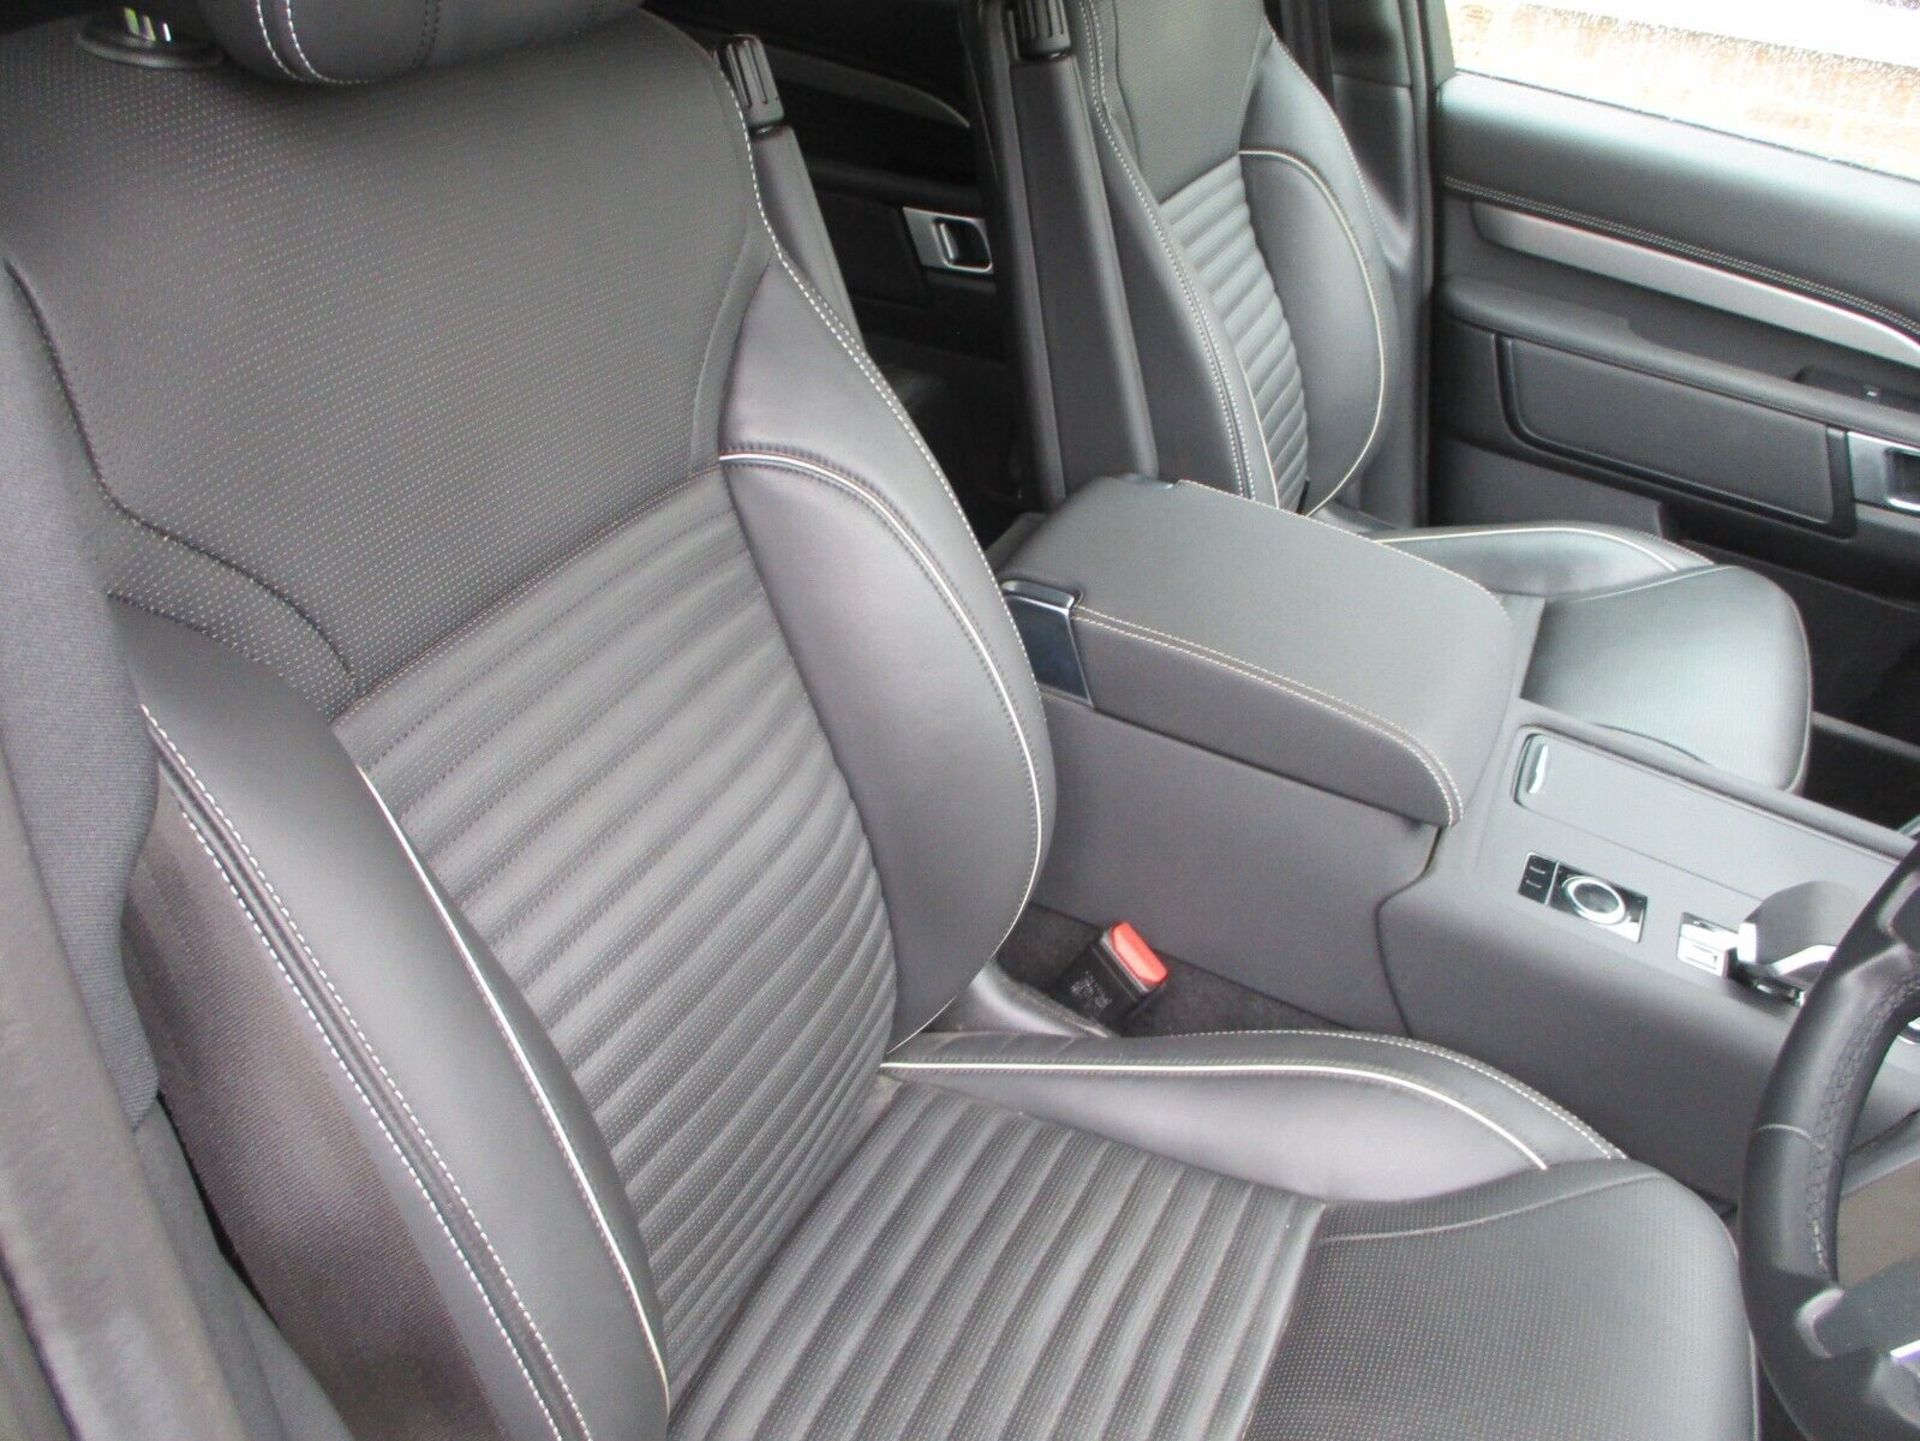 2022 LAND ROVER DISCOVERY R DYNAMIC HSE - RARE REAR SEAT CONVERSION - IMMACULATE CONDITION! - Image 13 of 18